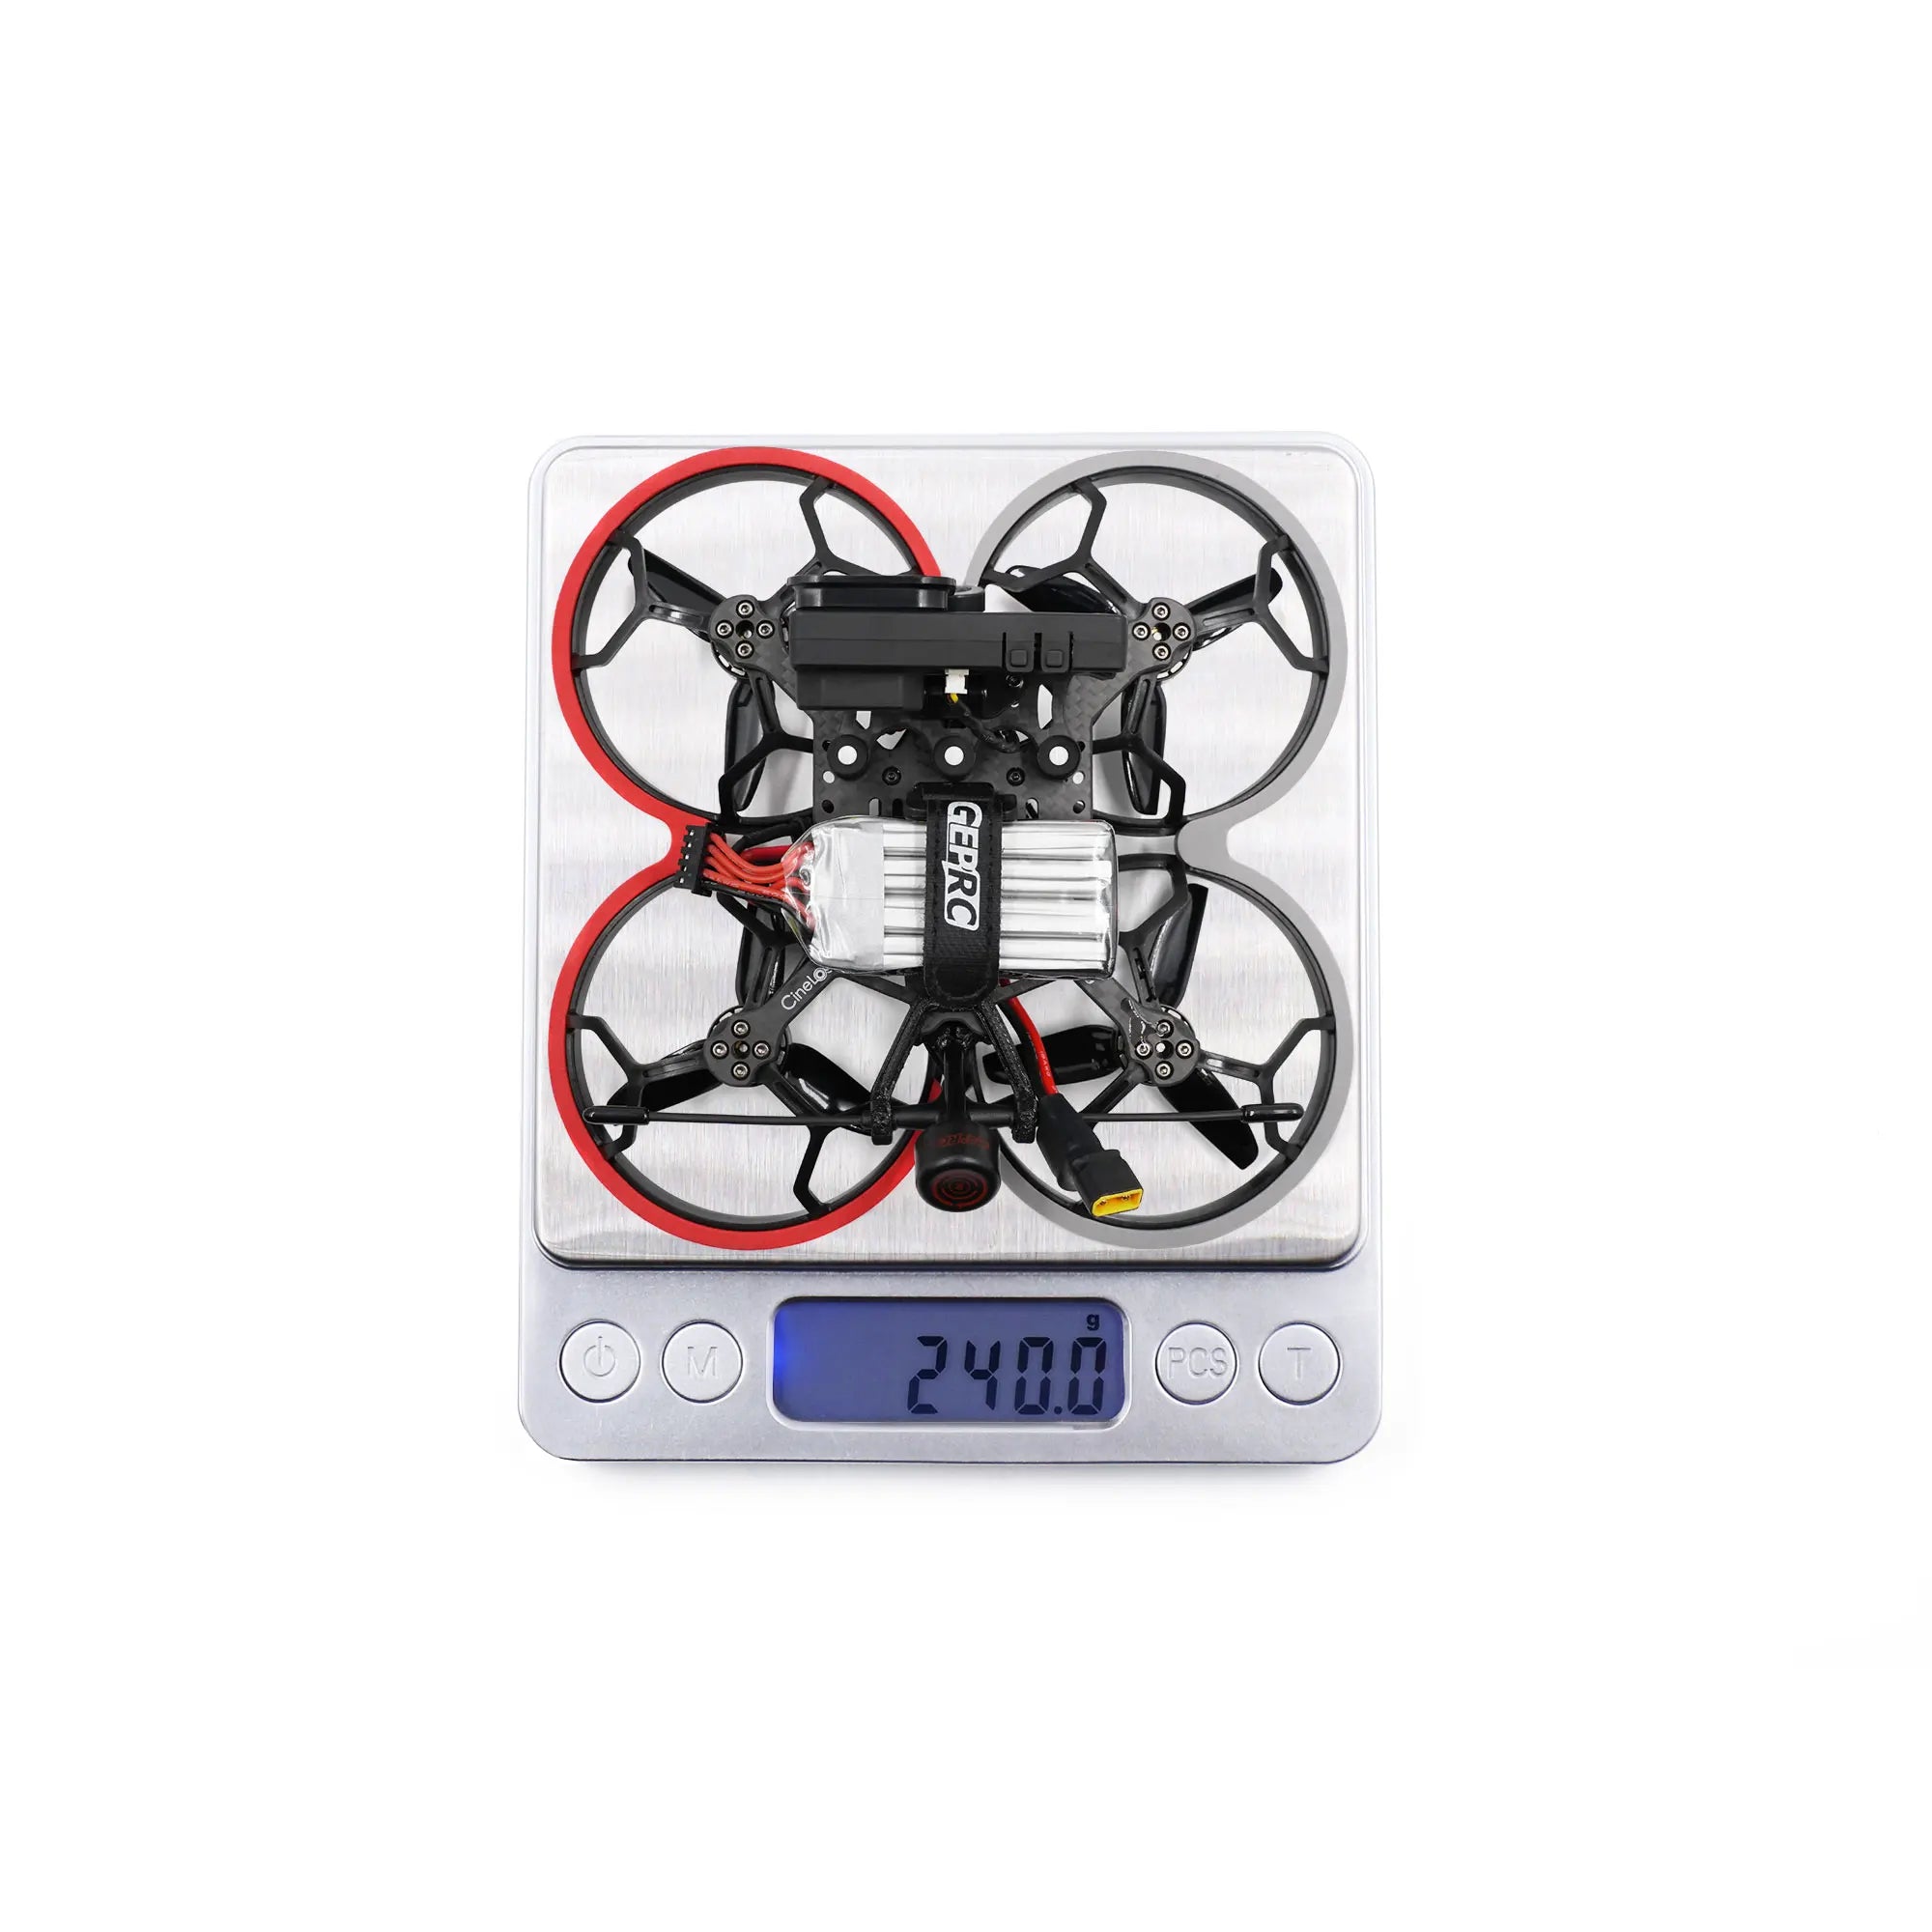 GEPRC CineLog30 Cinewhoop Drone, we pursue lighter weight, better flying feel and more extended functions of the Quadcopter